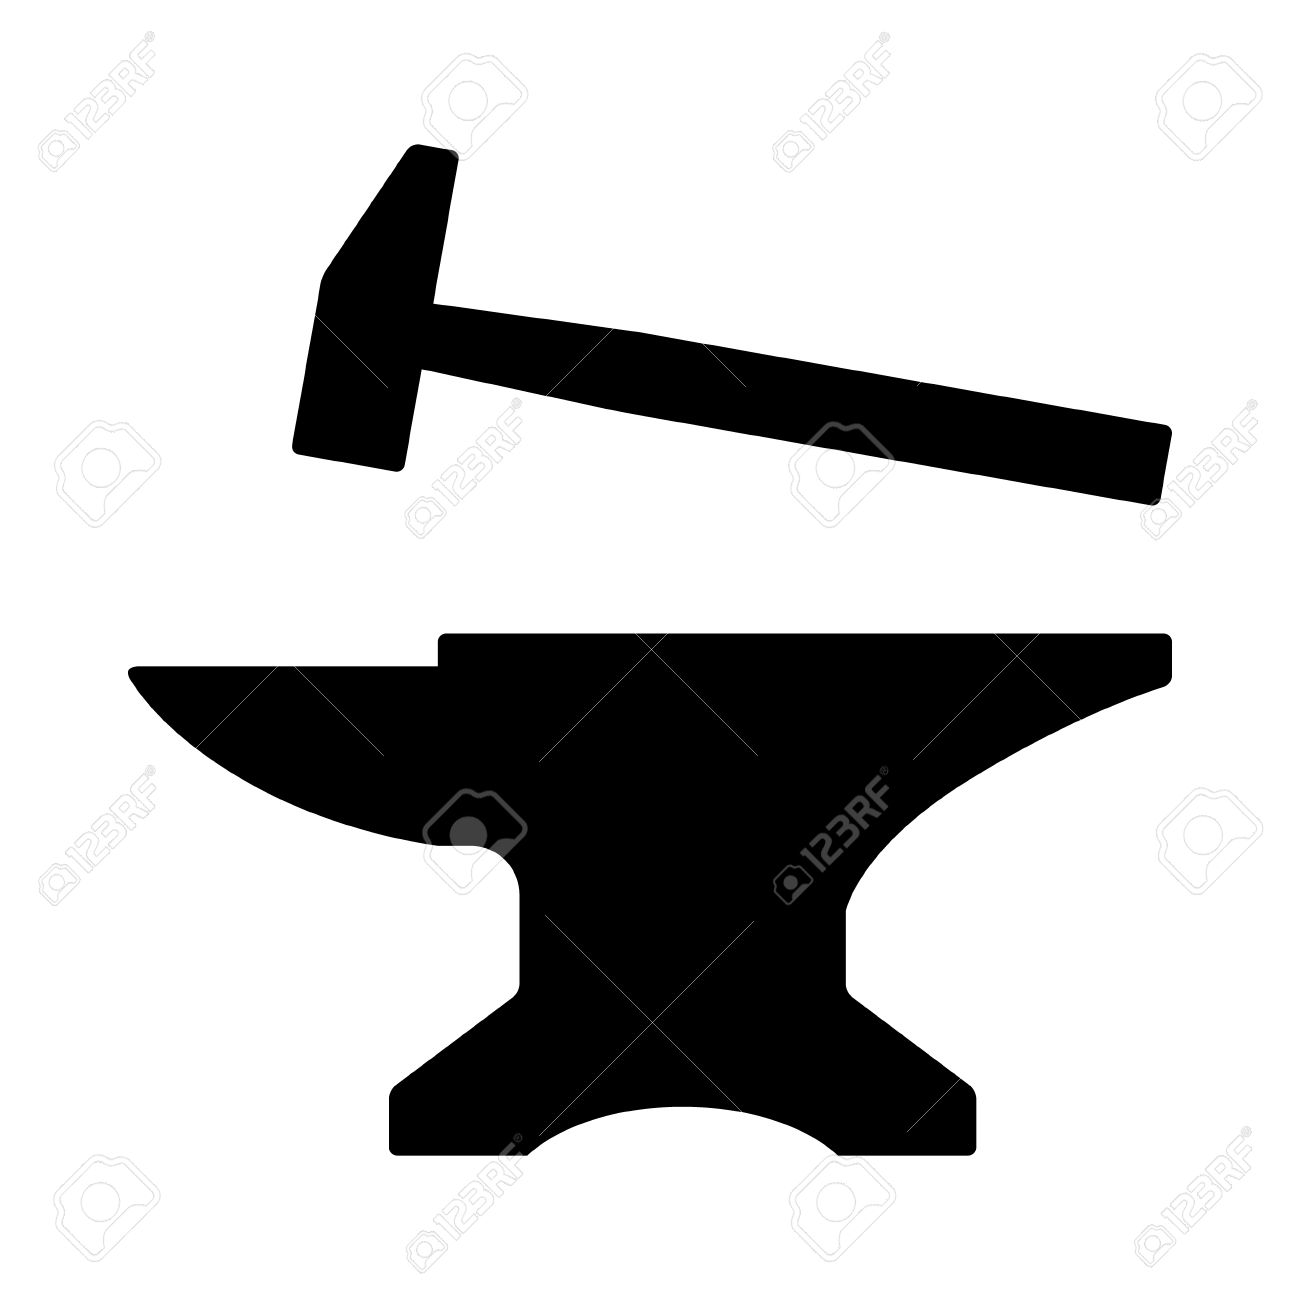 166 Anvil free clipart.